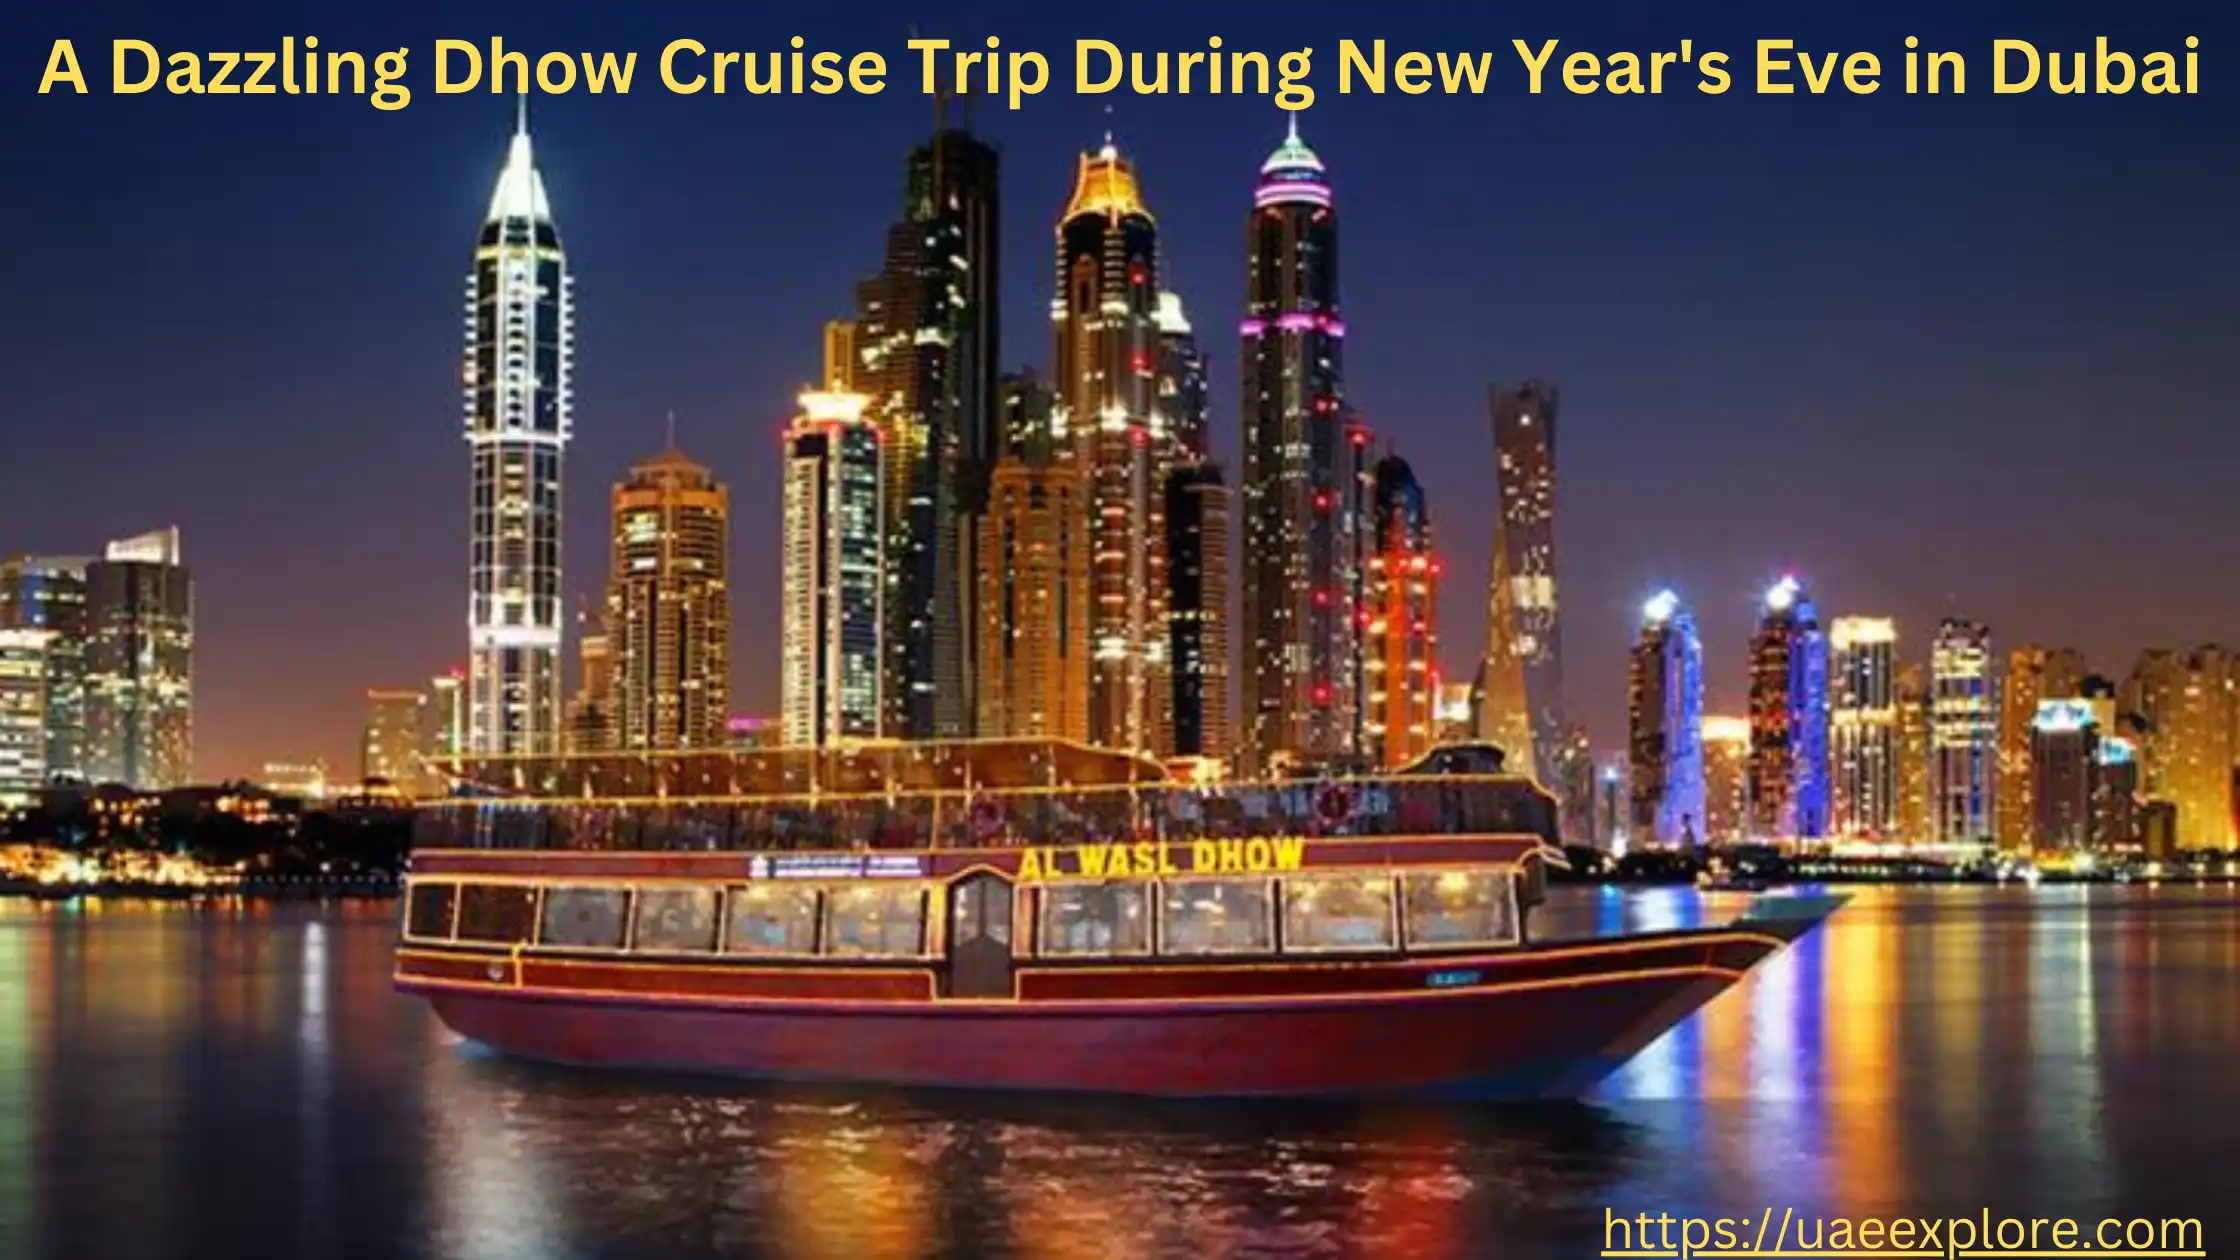 A Dazzling Dhow Cruise Trip During New Year's Eve in Dubai